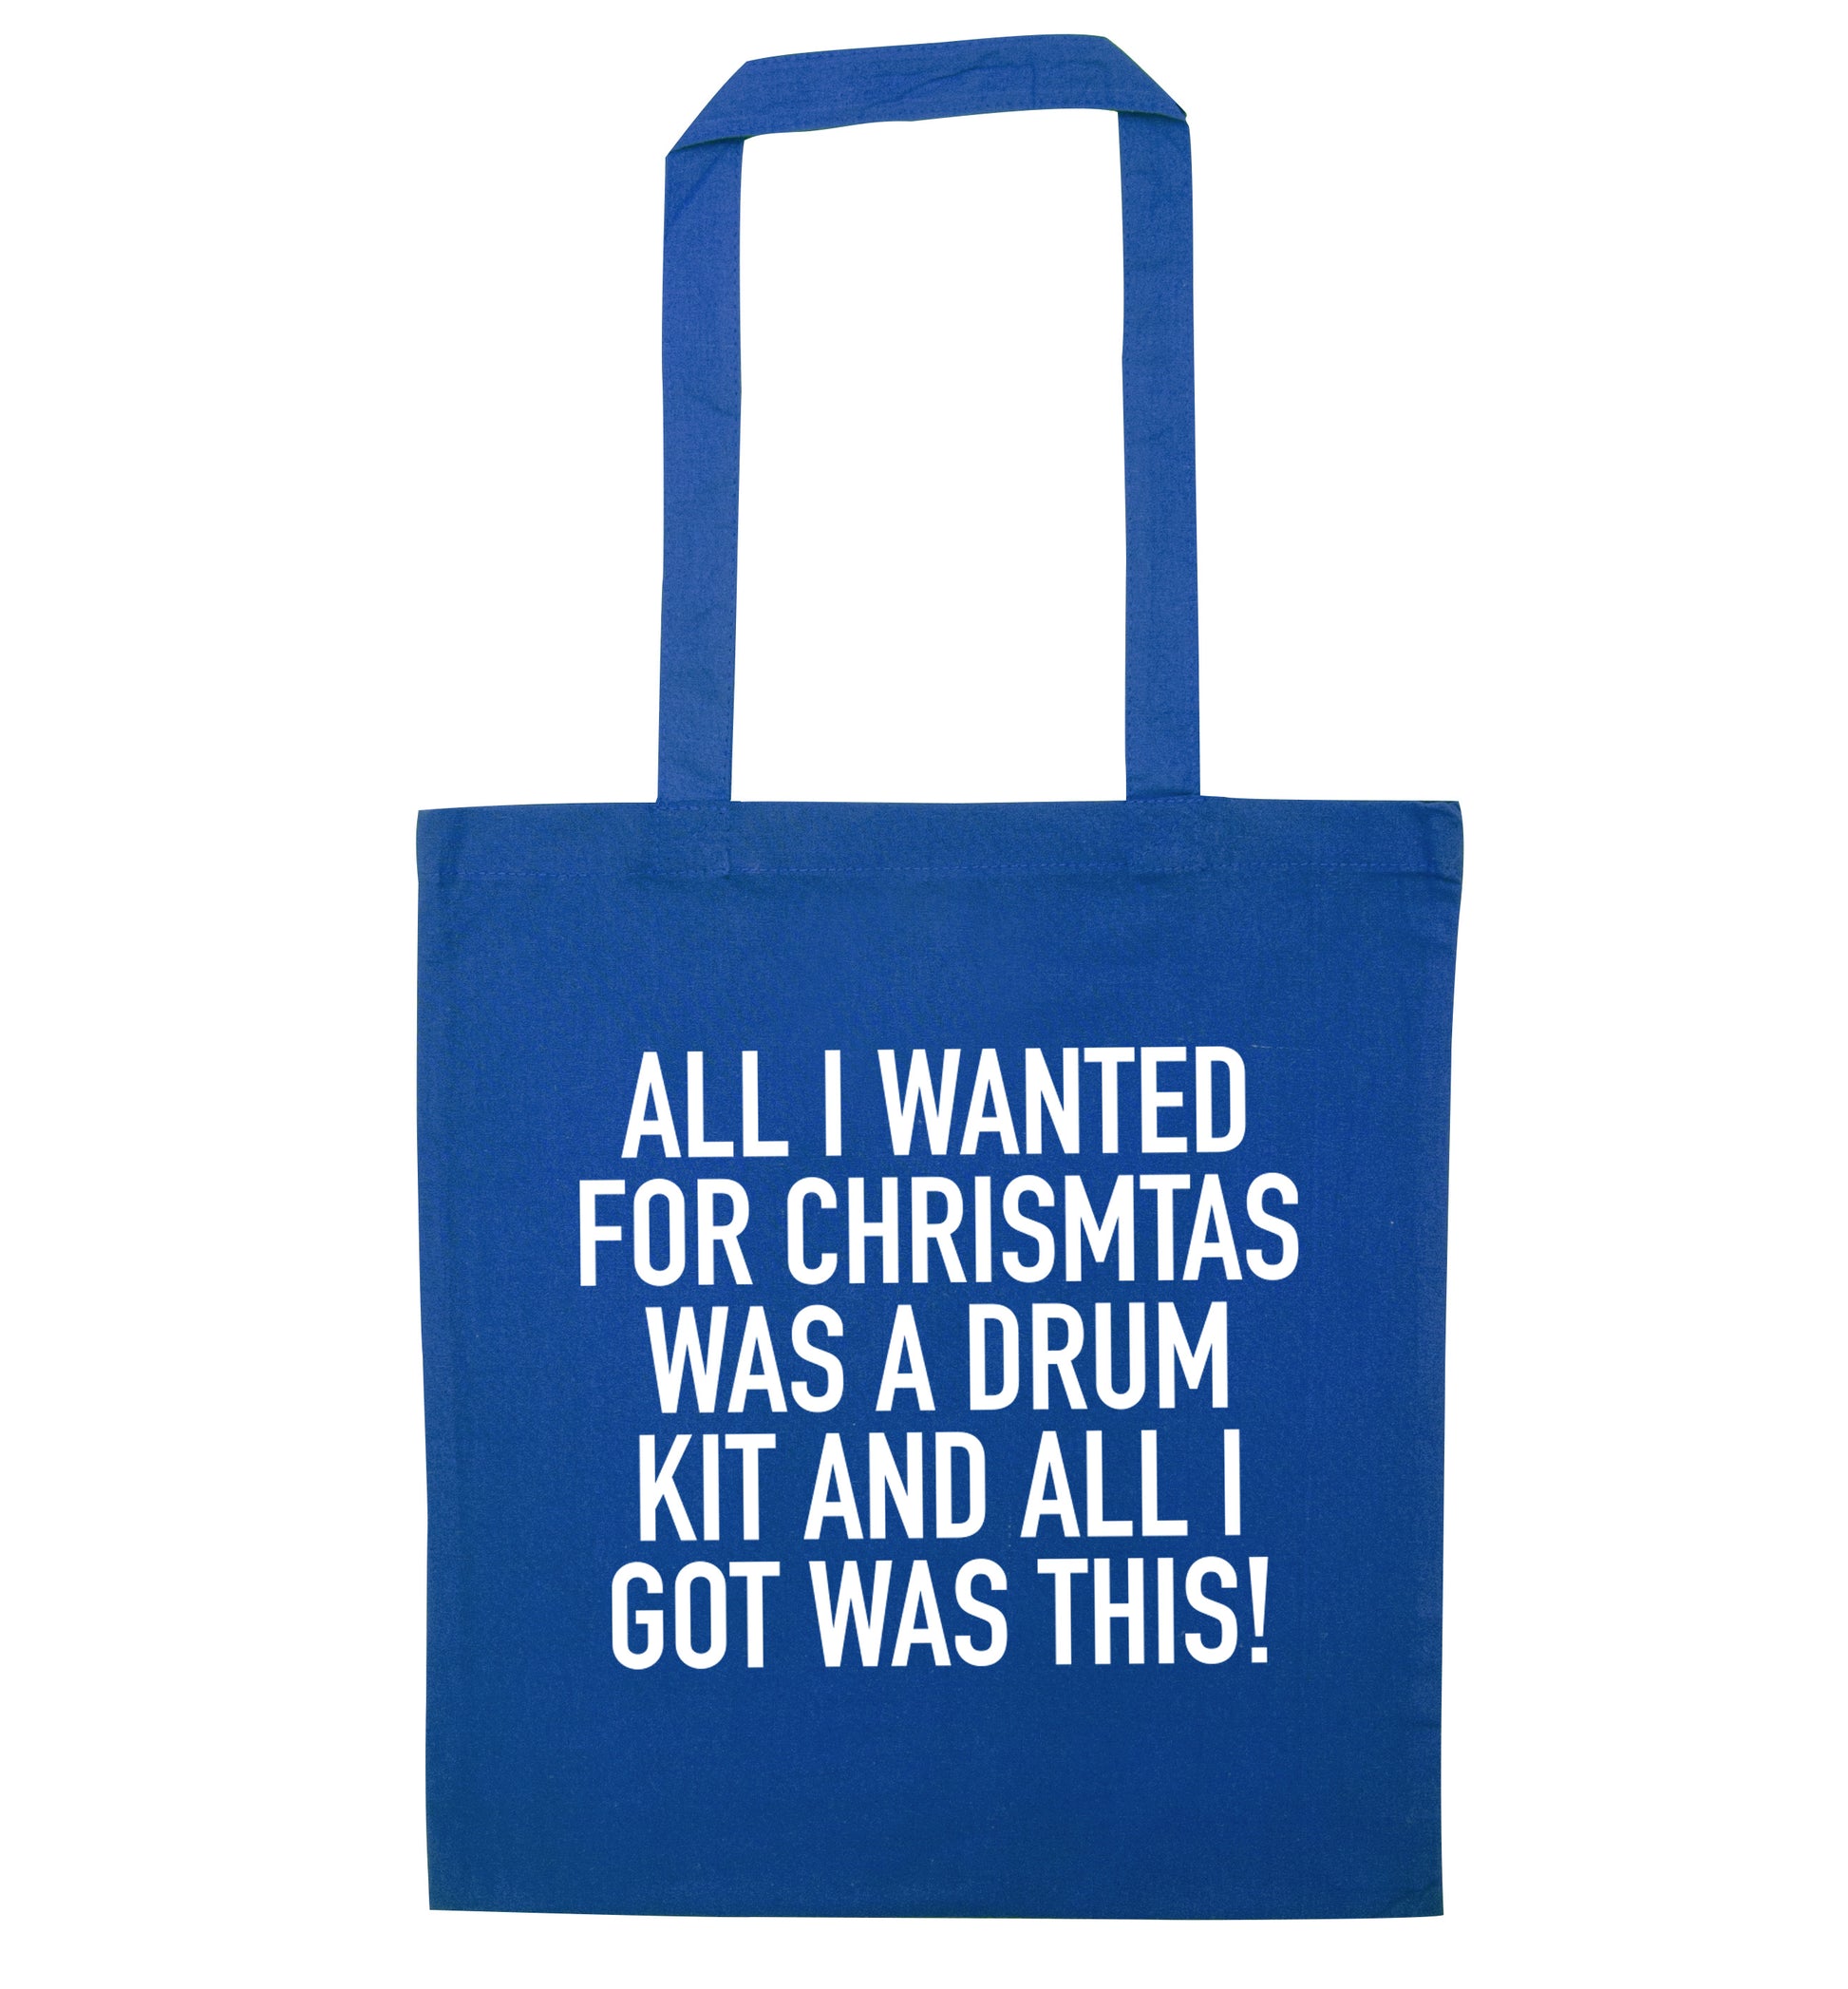 All I wanted for Christmas was a drum kit and all I got was this! blue tote bag